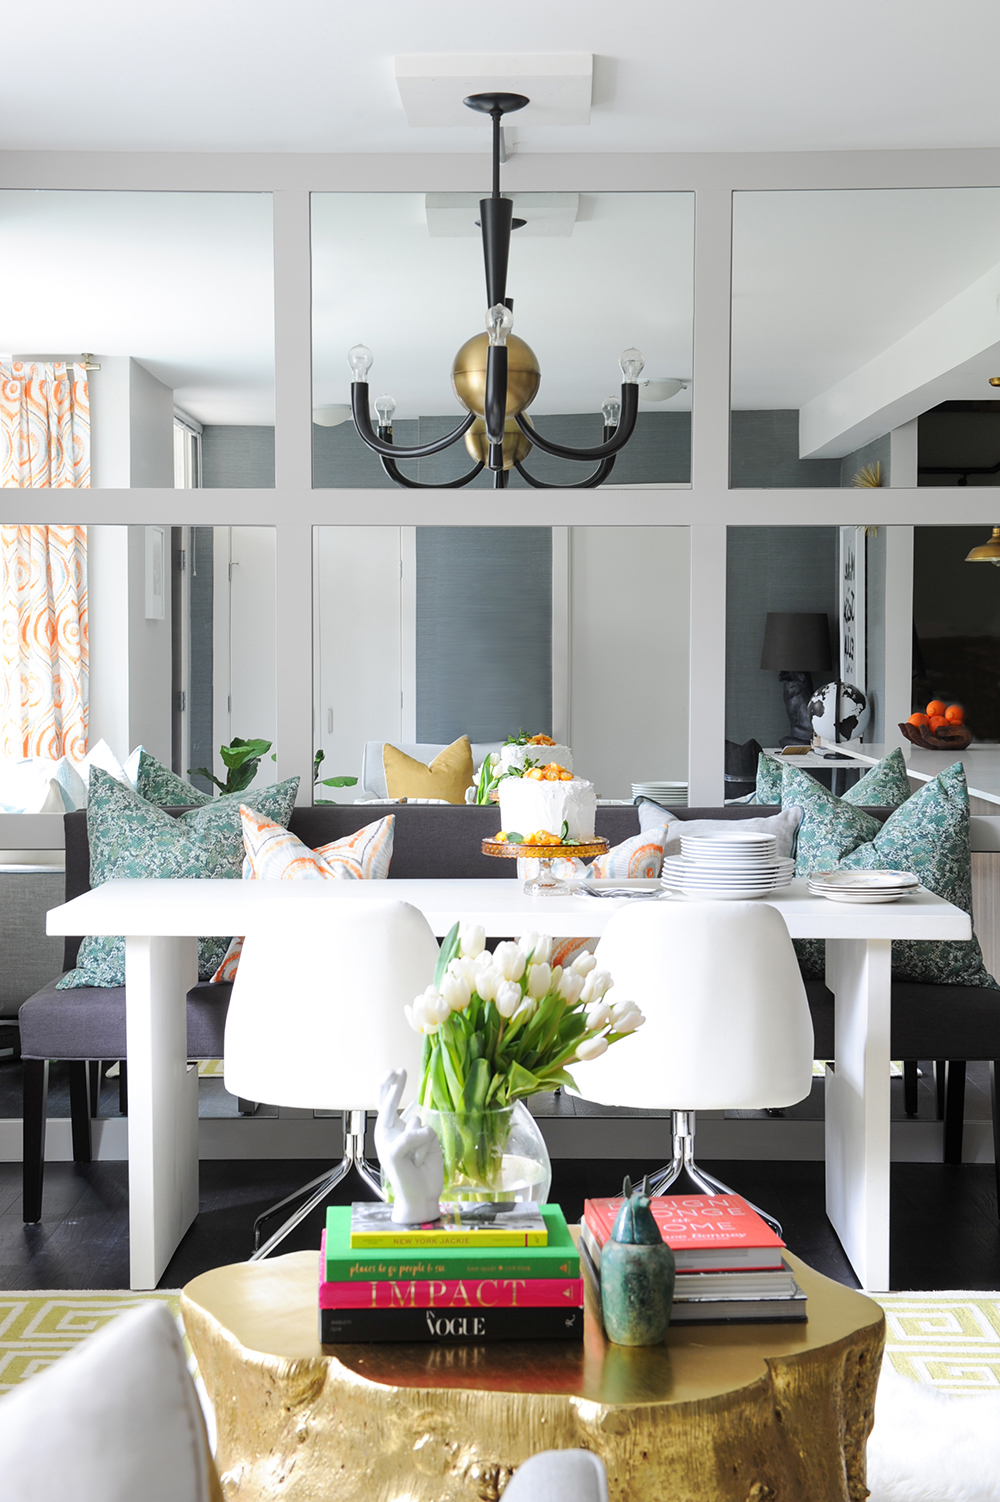 A colourful dining area with a mirrored feature wall.